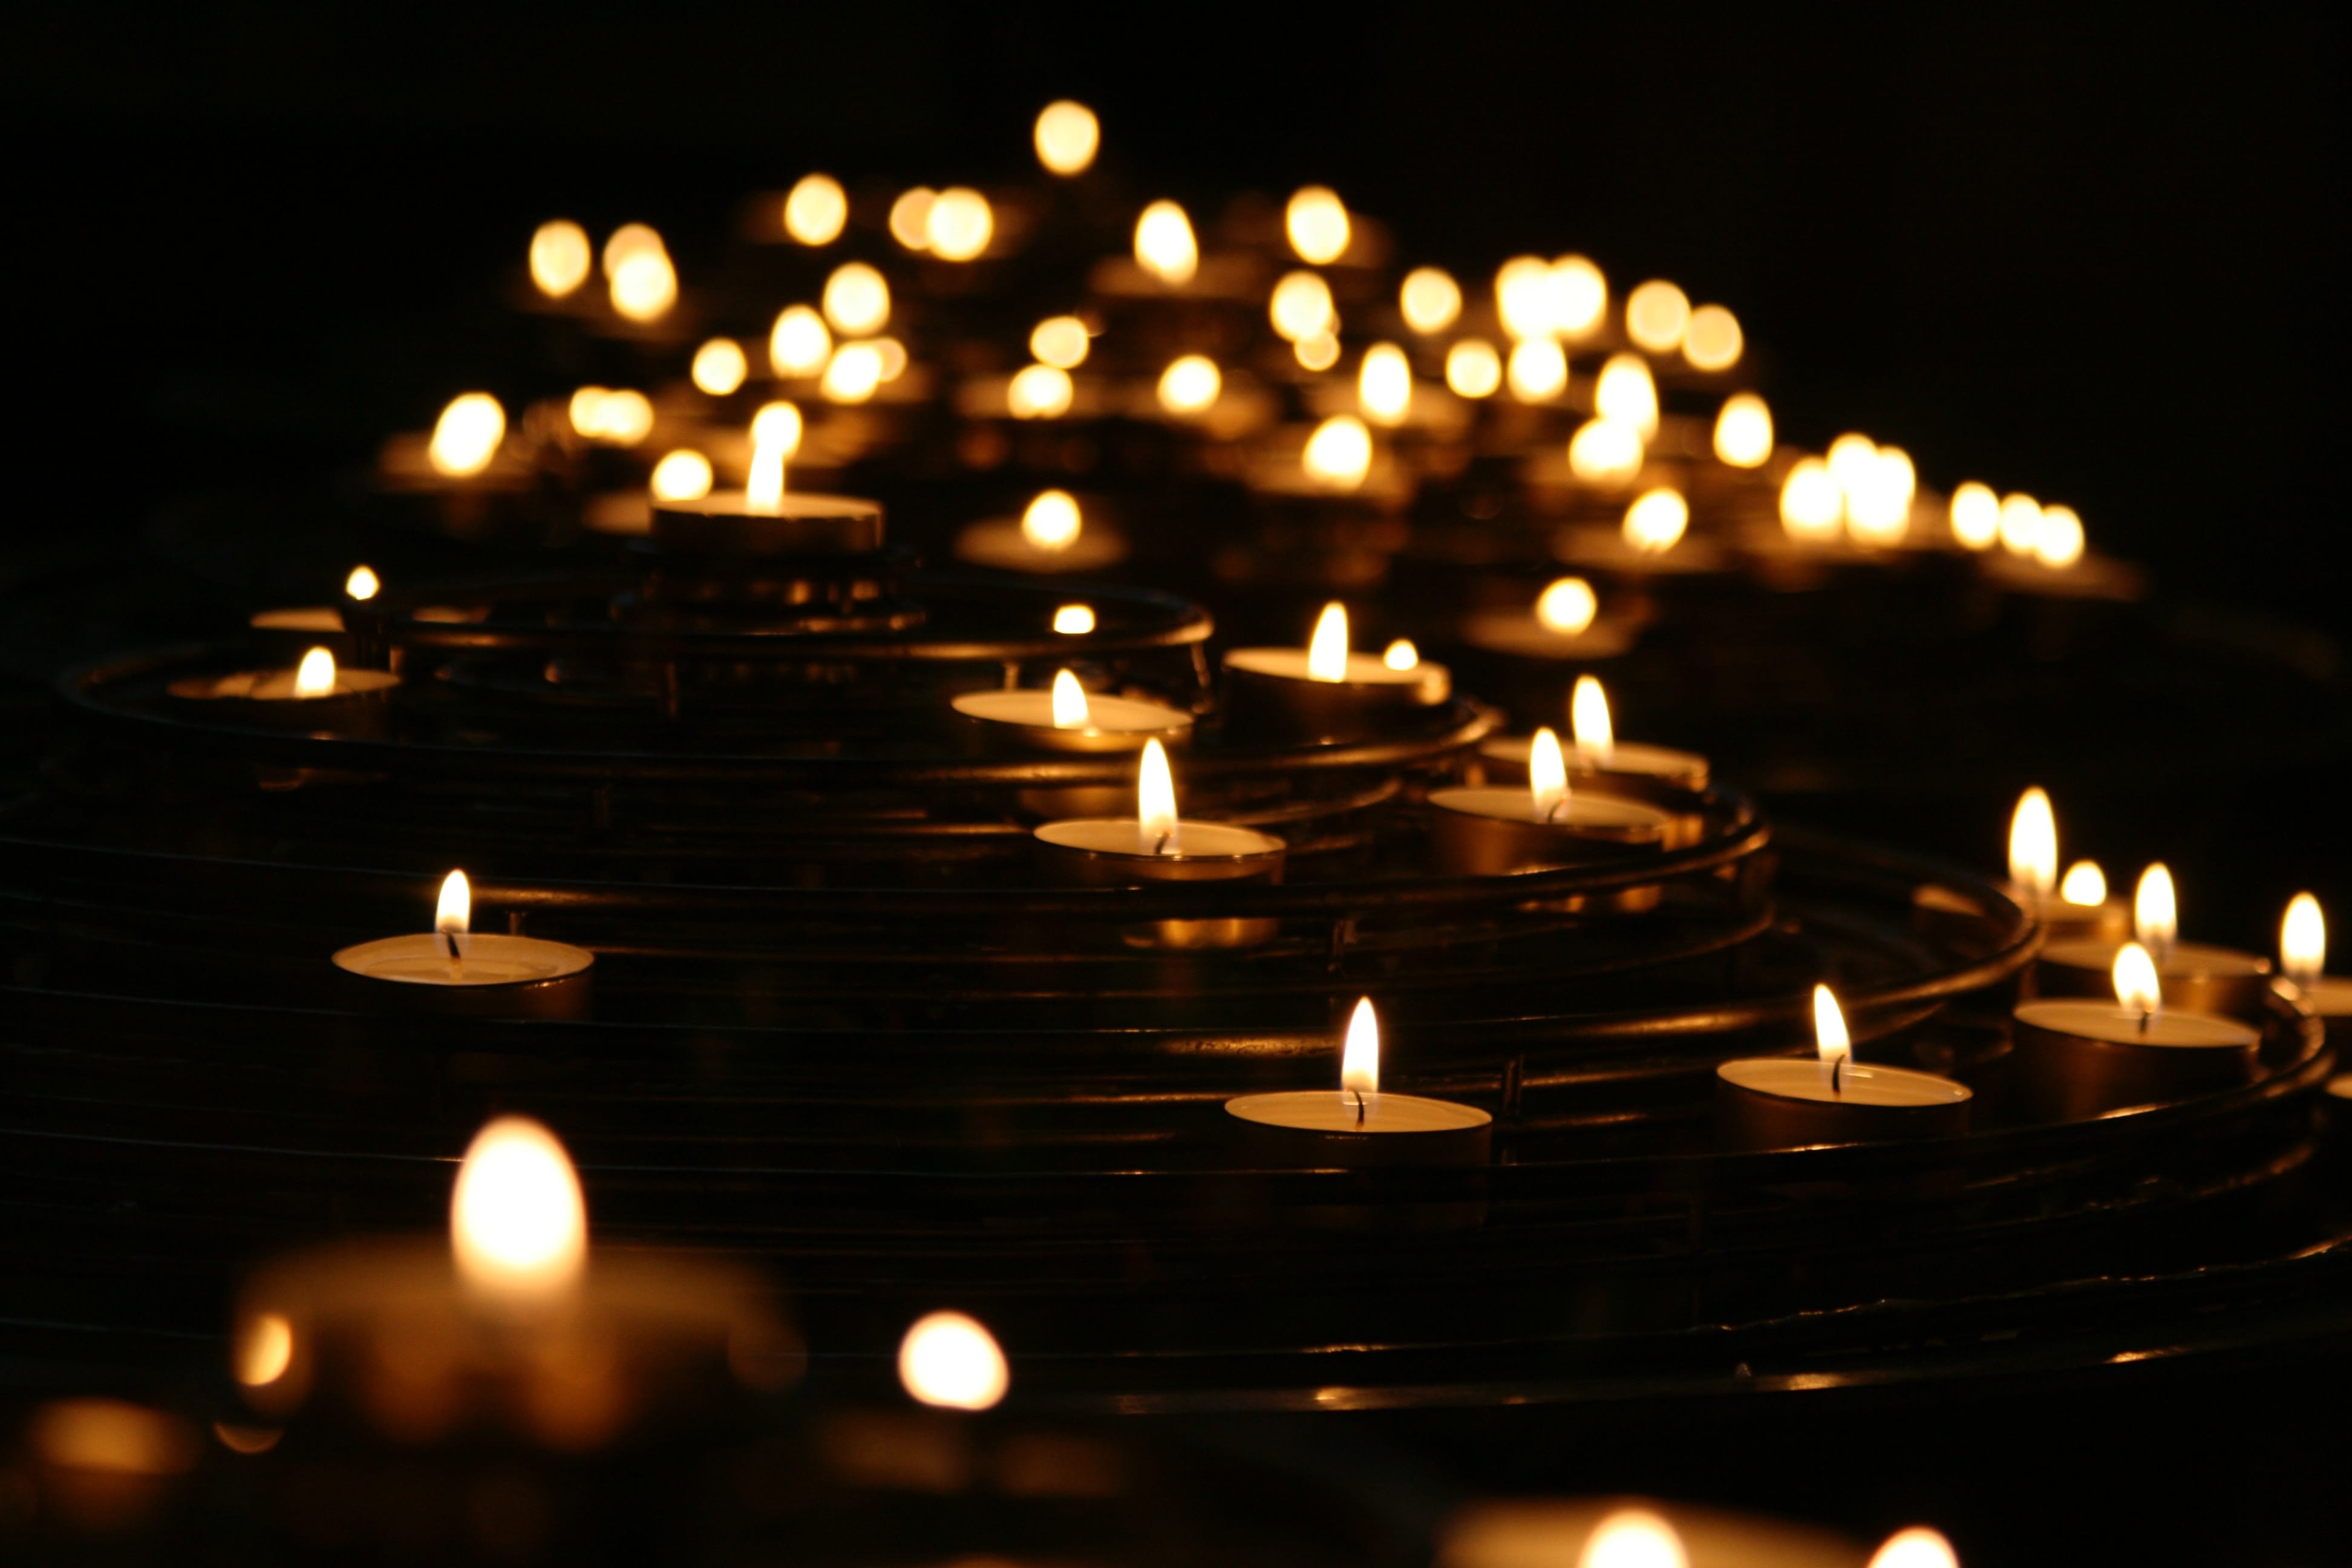 Low-angle photo of lighted candles; image by Mike Labrum, via Unsplash.com.